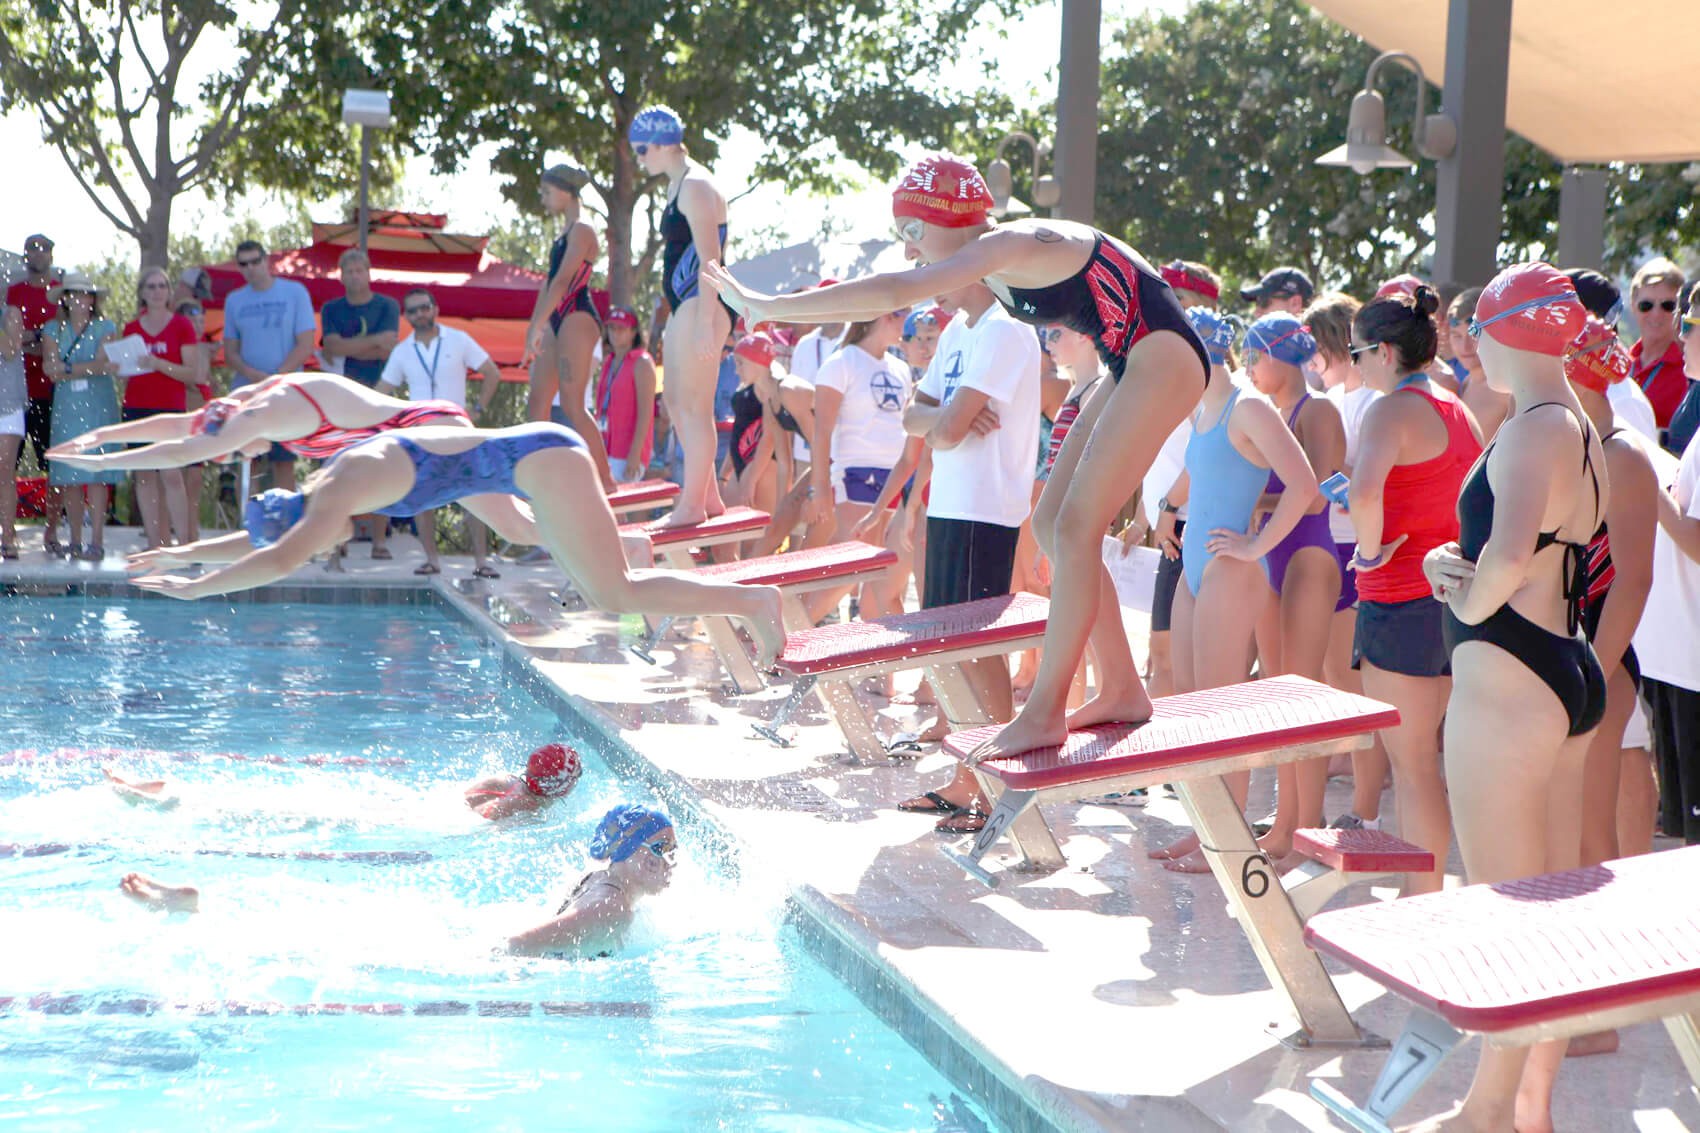 The Steiner Ranch Stars is made up of the Red and Blue teams which combined have more than 500 swimmers ages 5-17. This year the annual Star Wars meet was on June 30 where the two teams raced against each other.